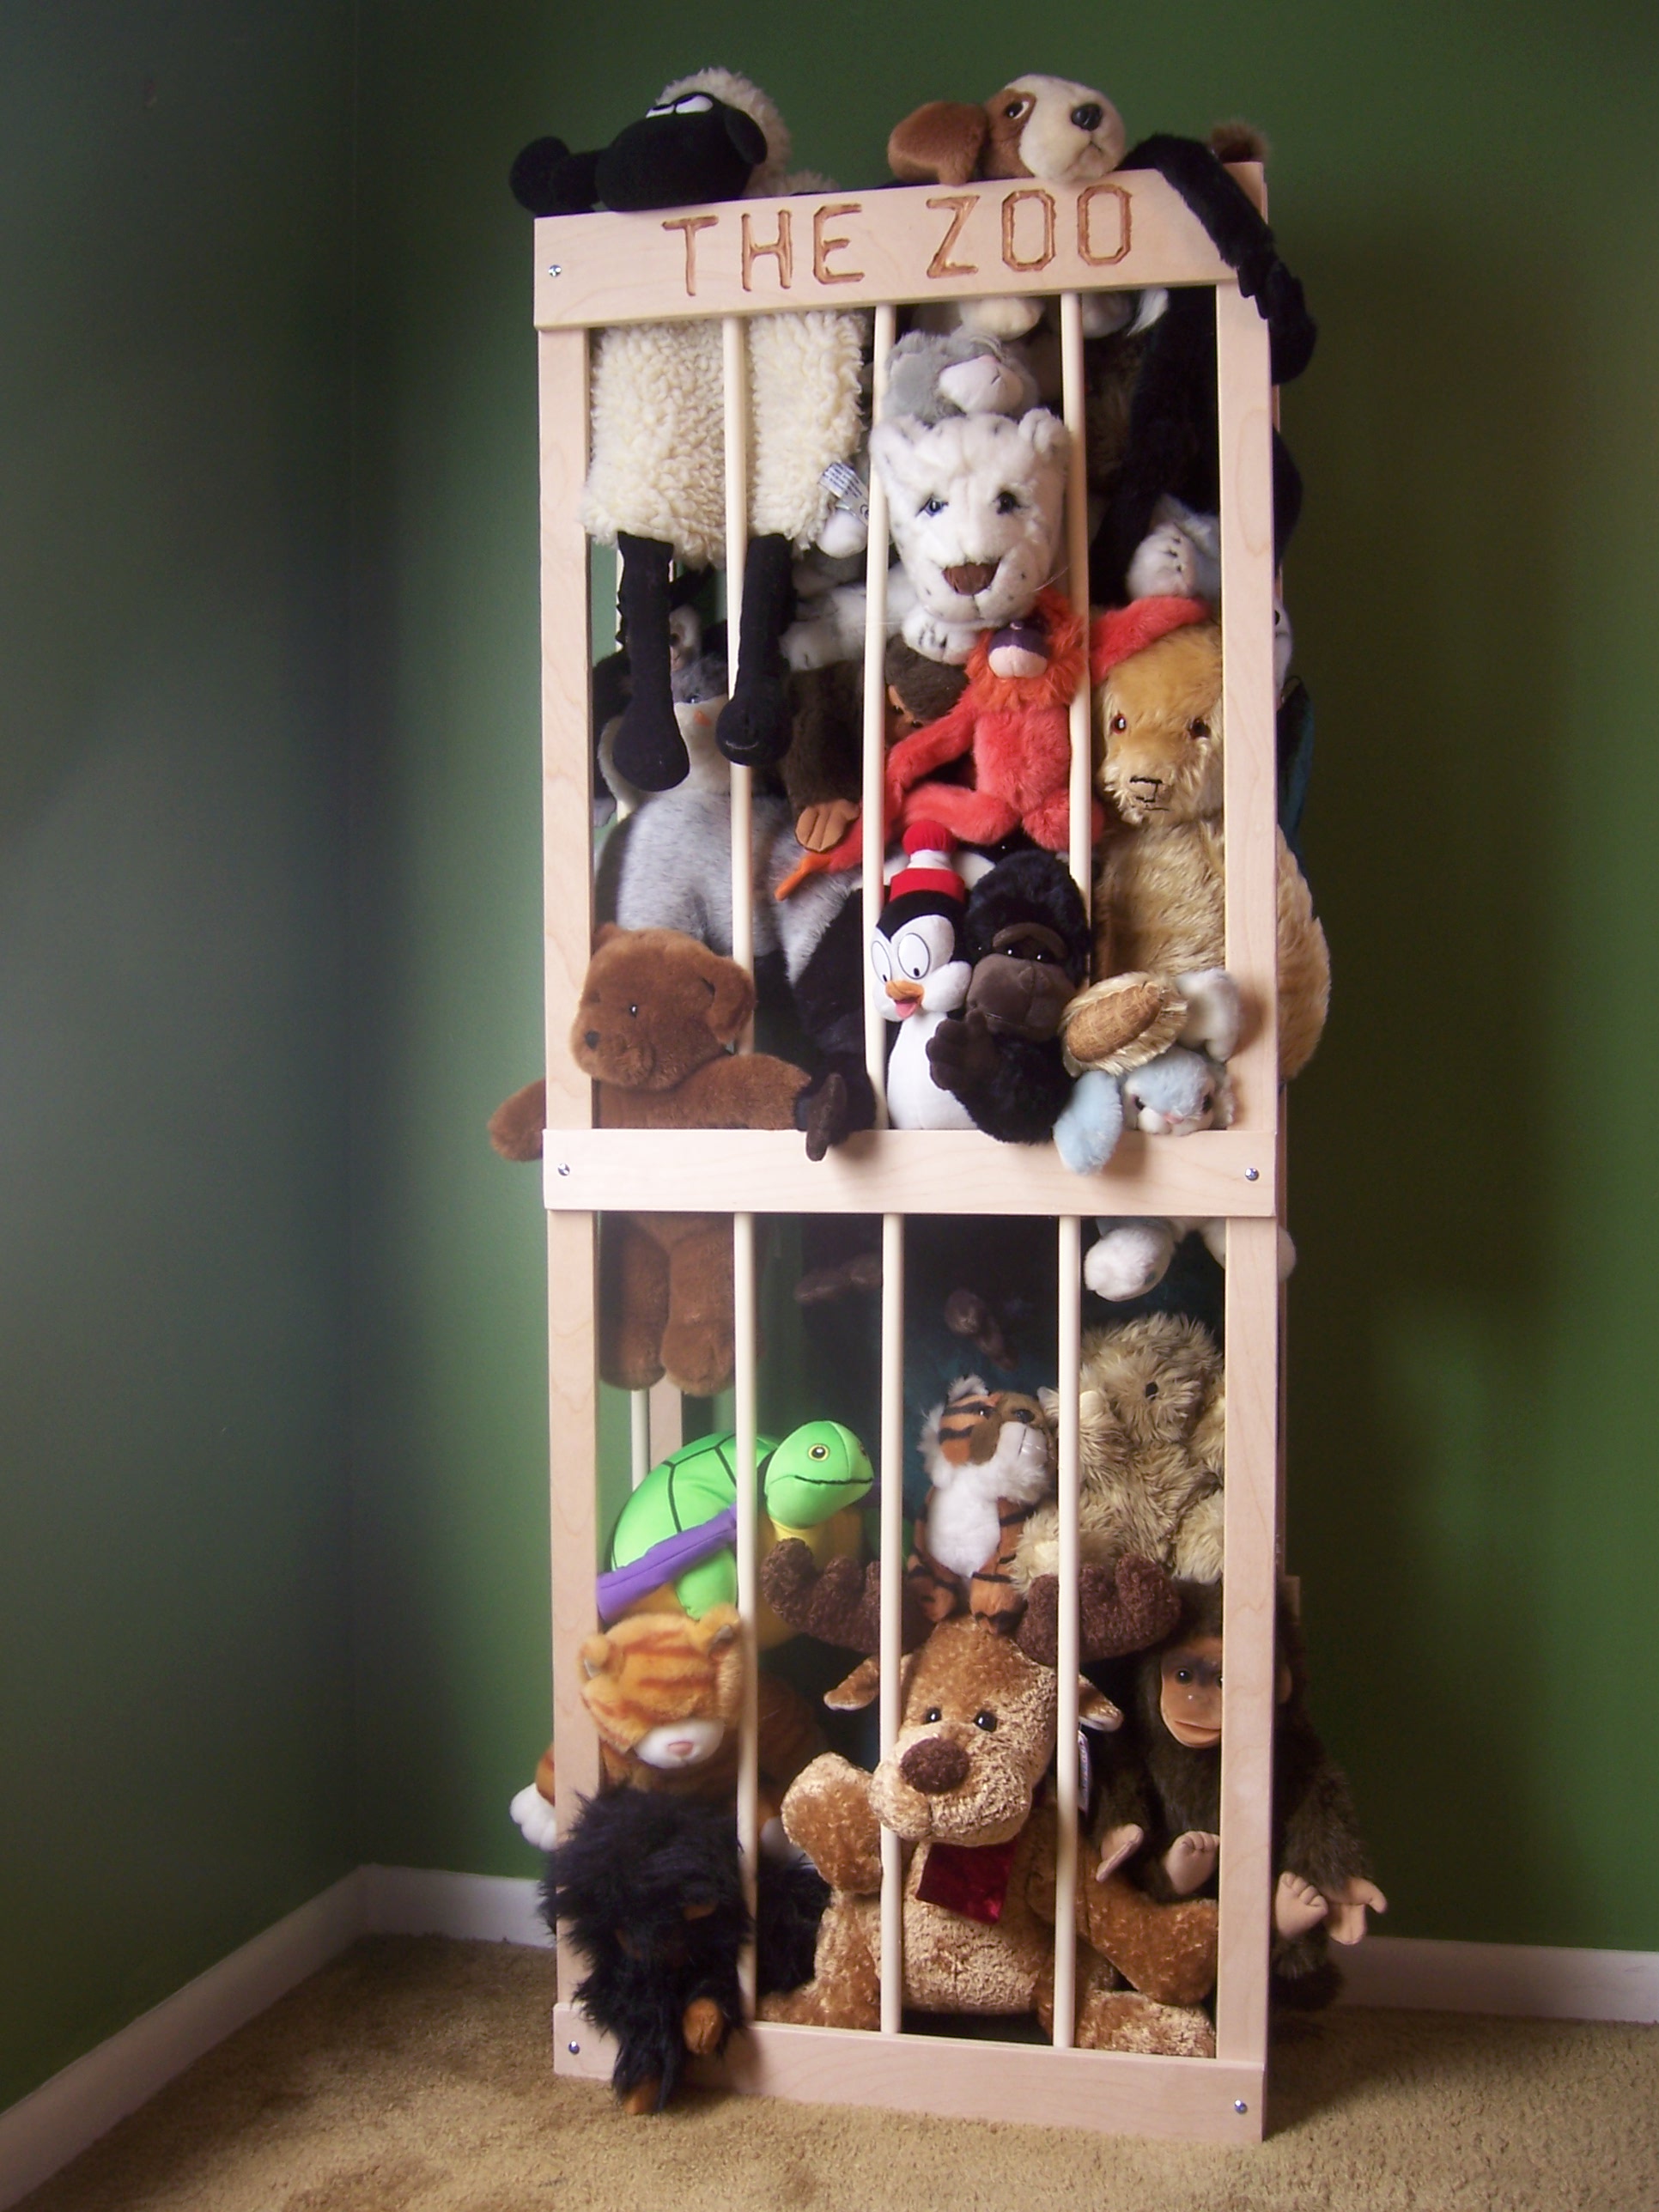 Homeless Stuffed Animals Find Shelter in 'The Zoo' -- An Innovative New